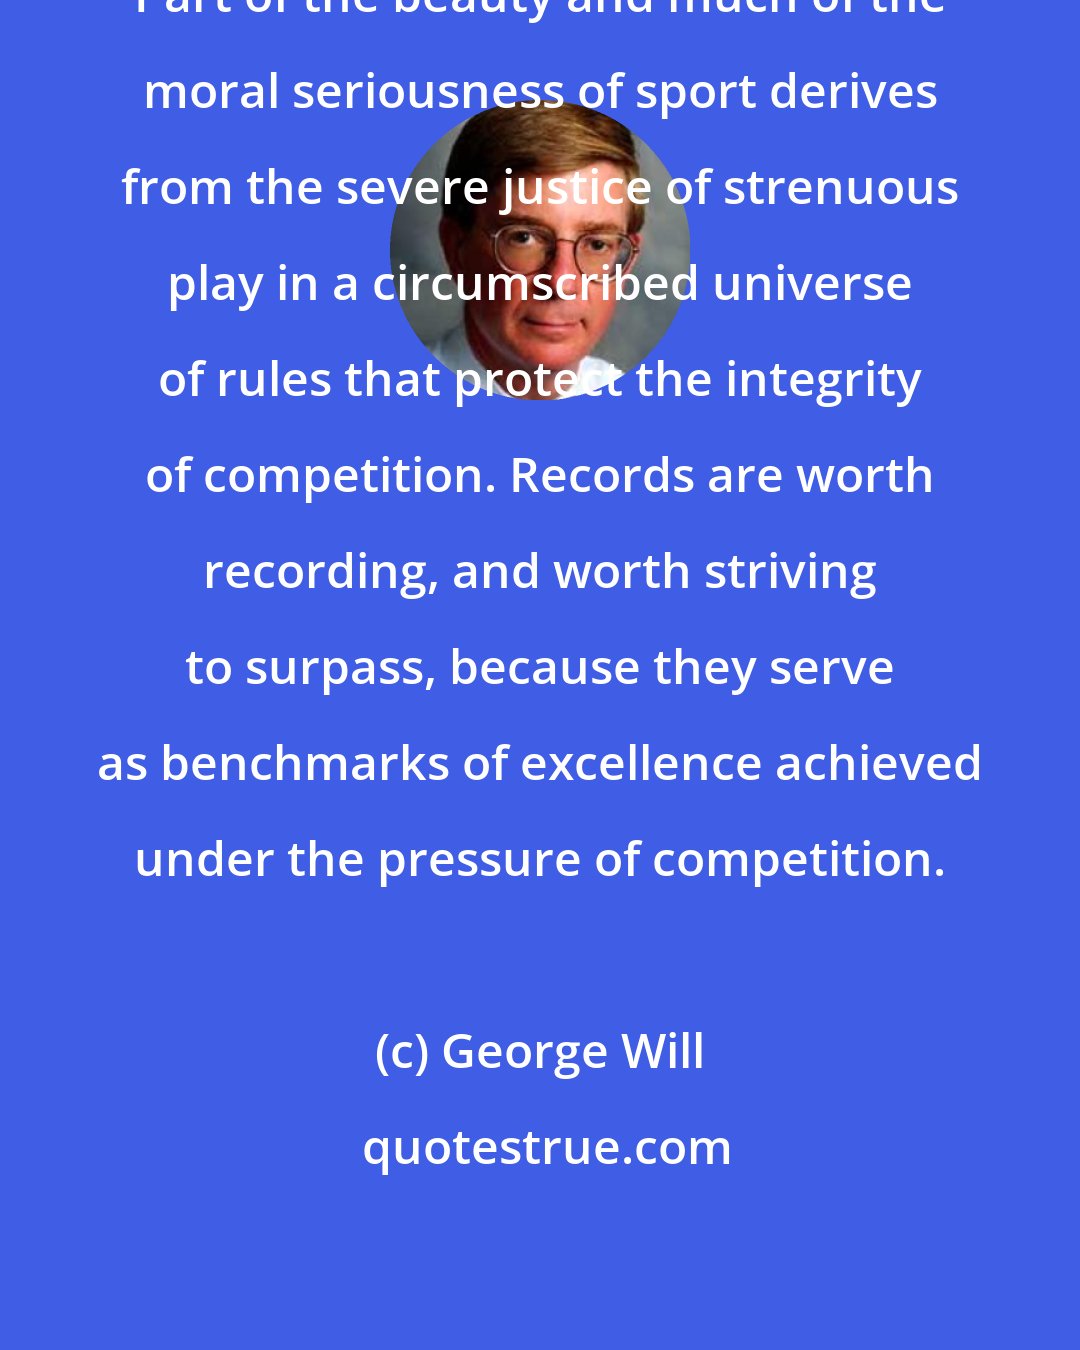 George Will: Part of the beauty and much of the moral seriousness of sport derives from the severe justice of strenuous play in a circumscribed universe of rules that protect the integrity of competition. Records are worth recording, and worth striving to surpass, because they serve as benchmarks of excellence achieved under the pressure of competition.